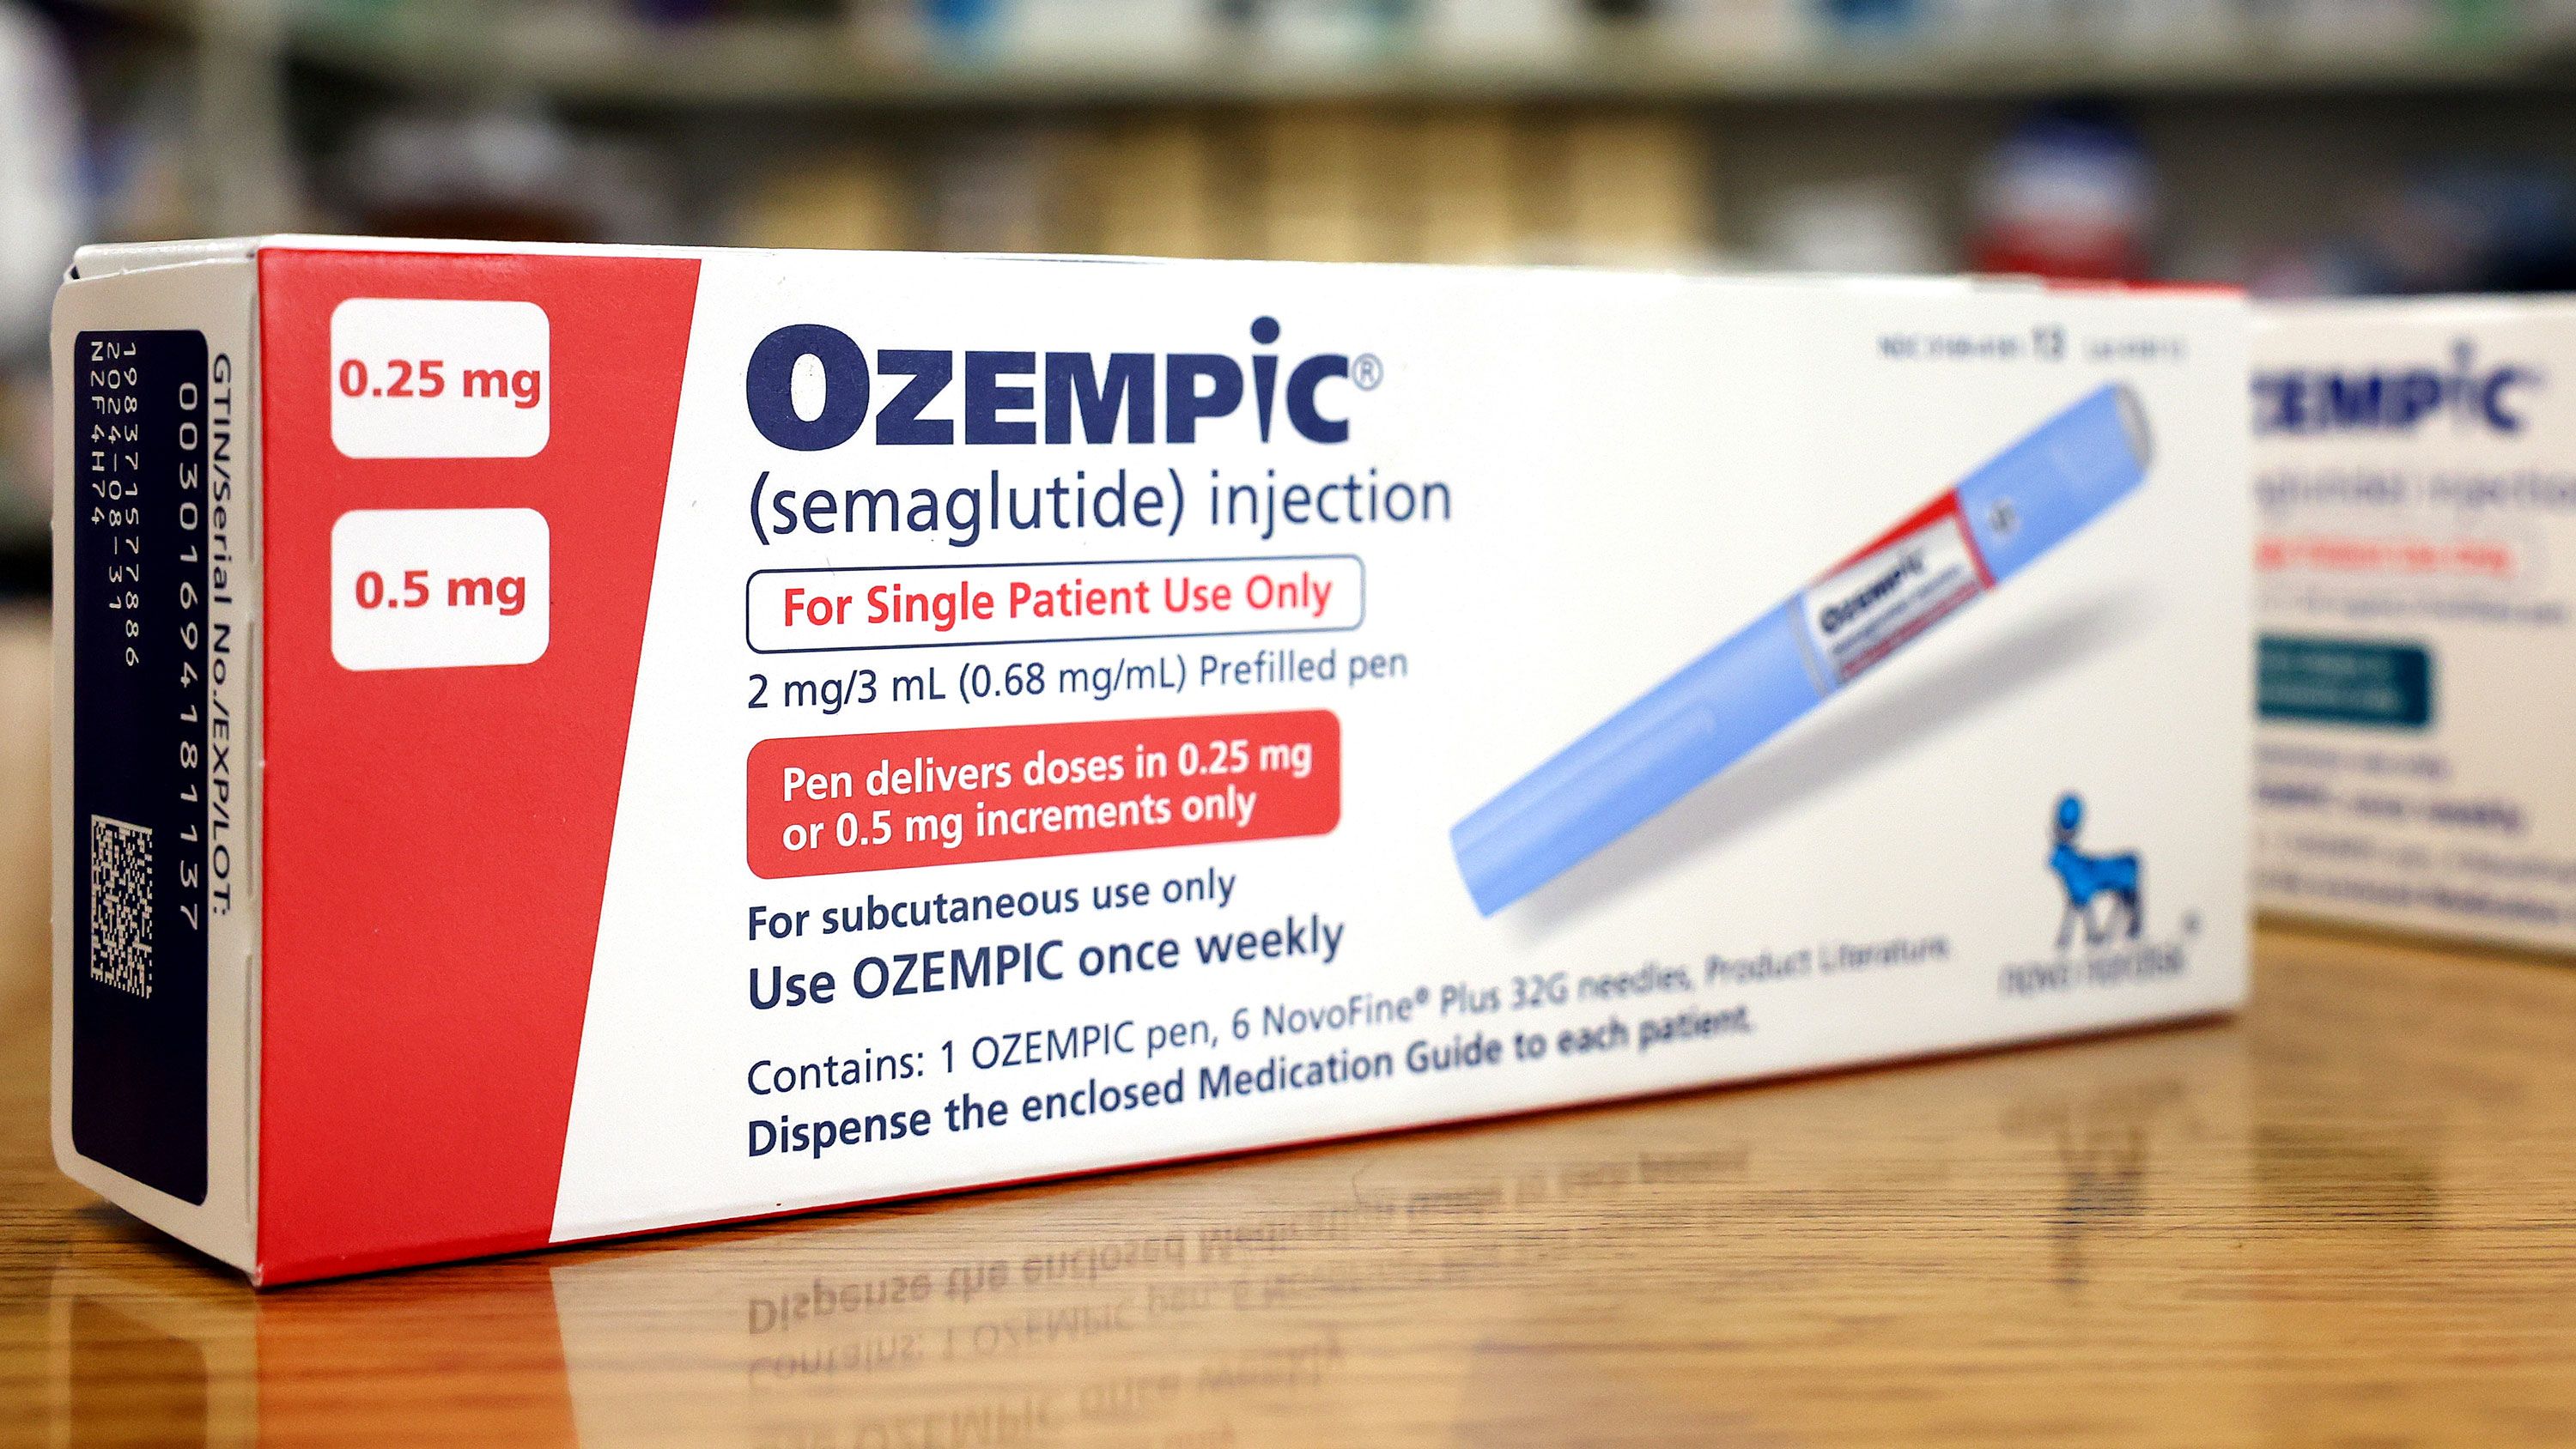 How weight loss drug Ozempic can help with heart, kidney health